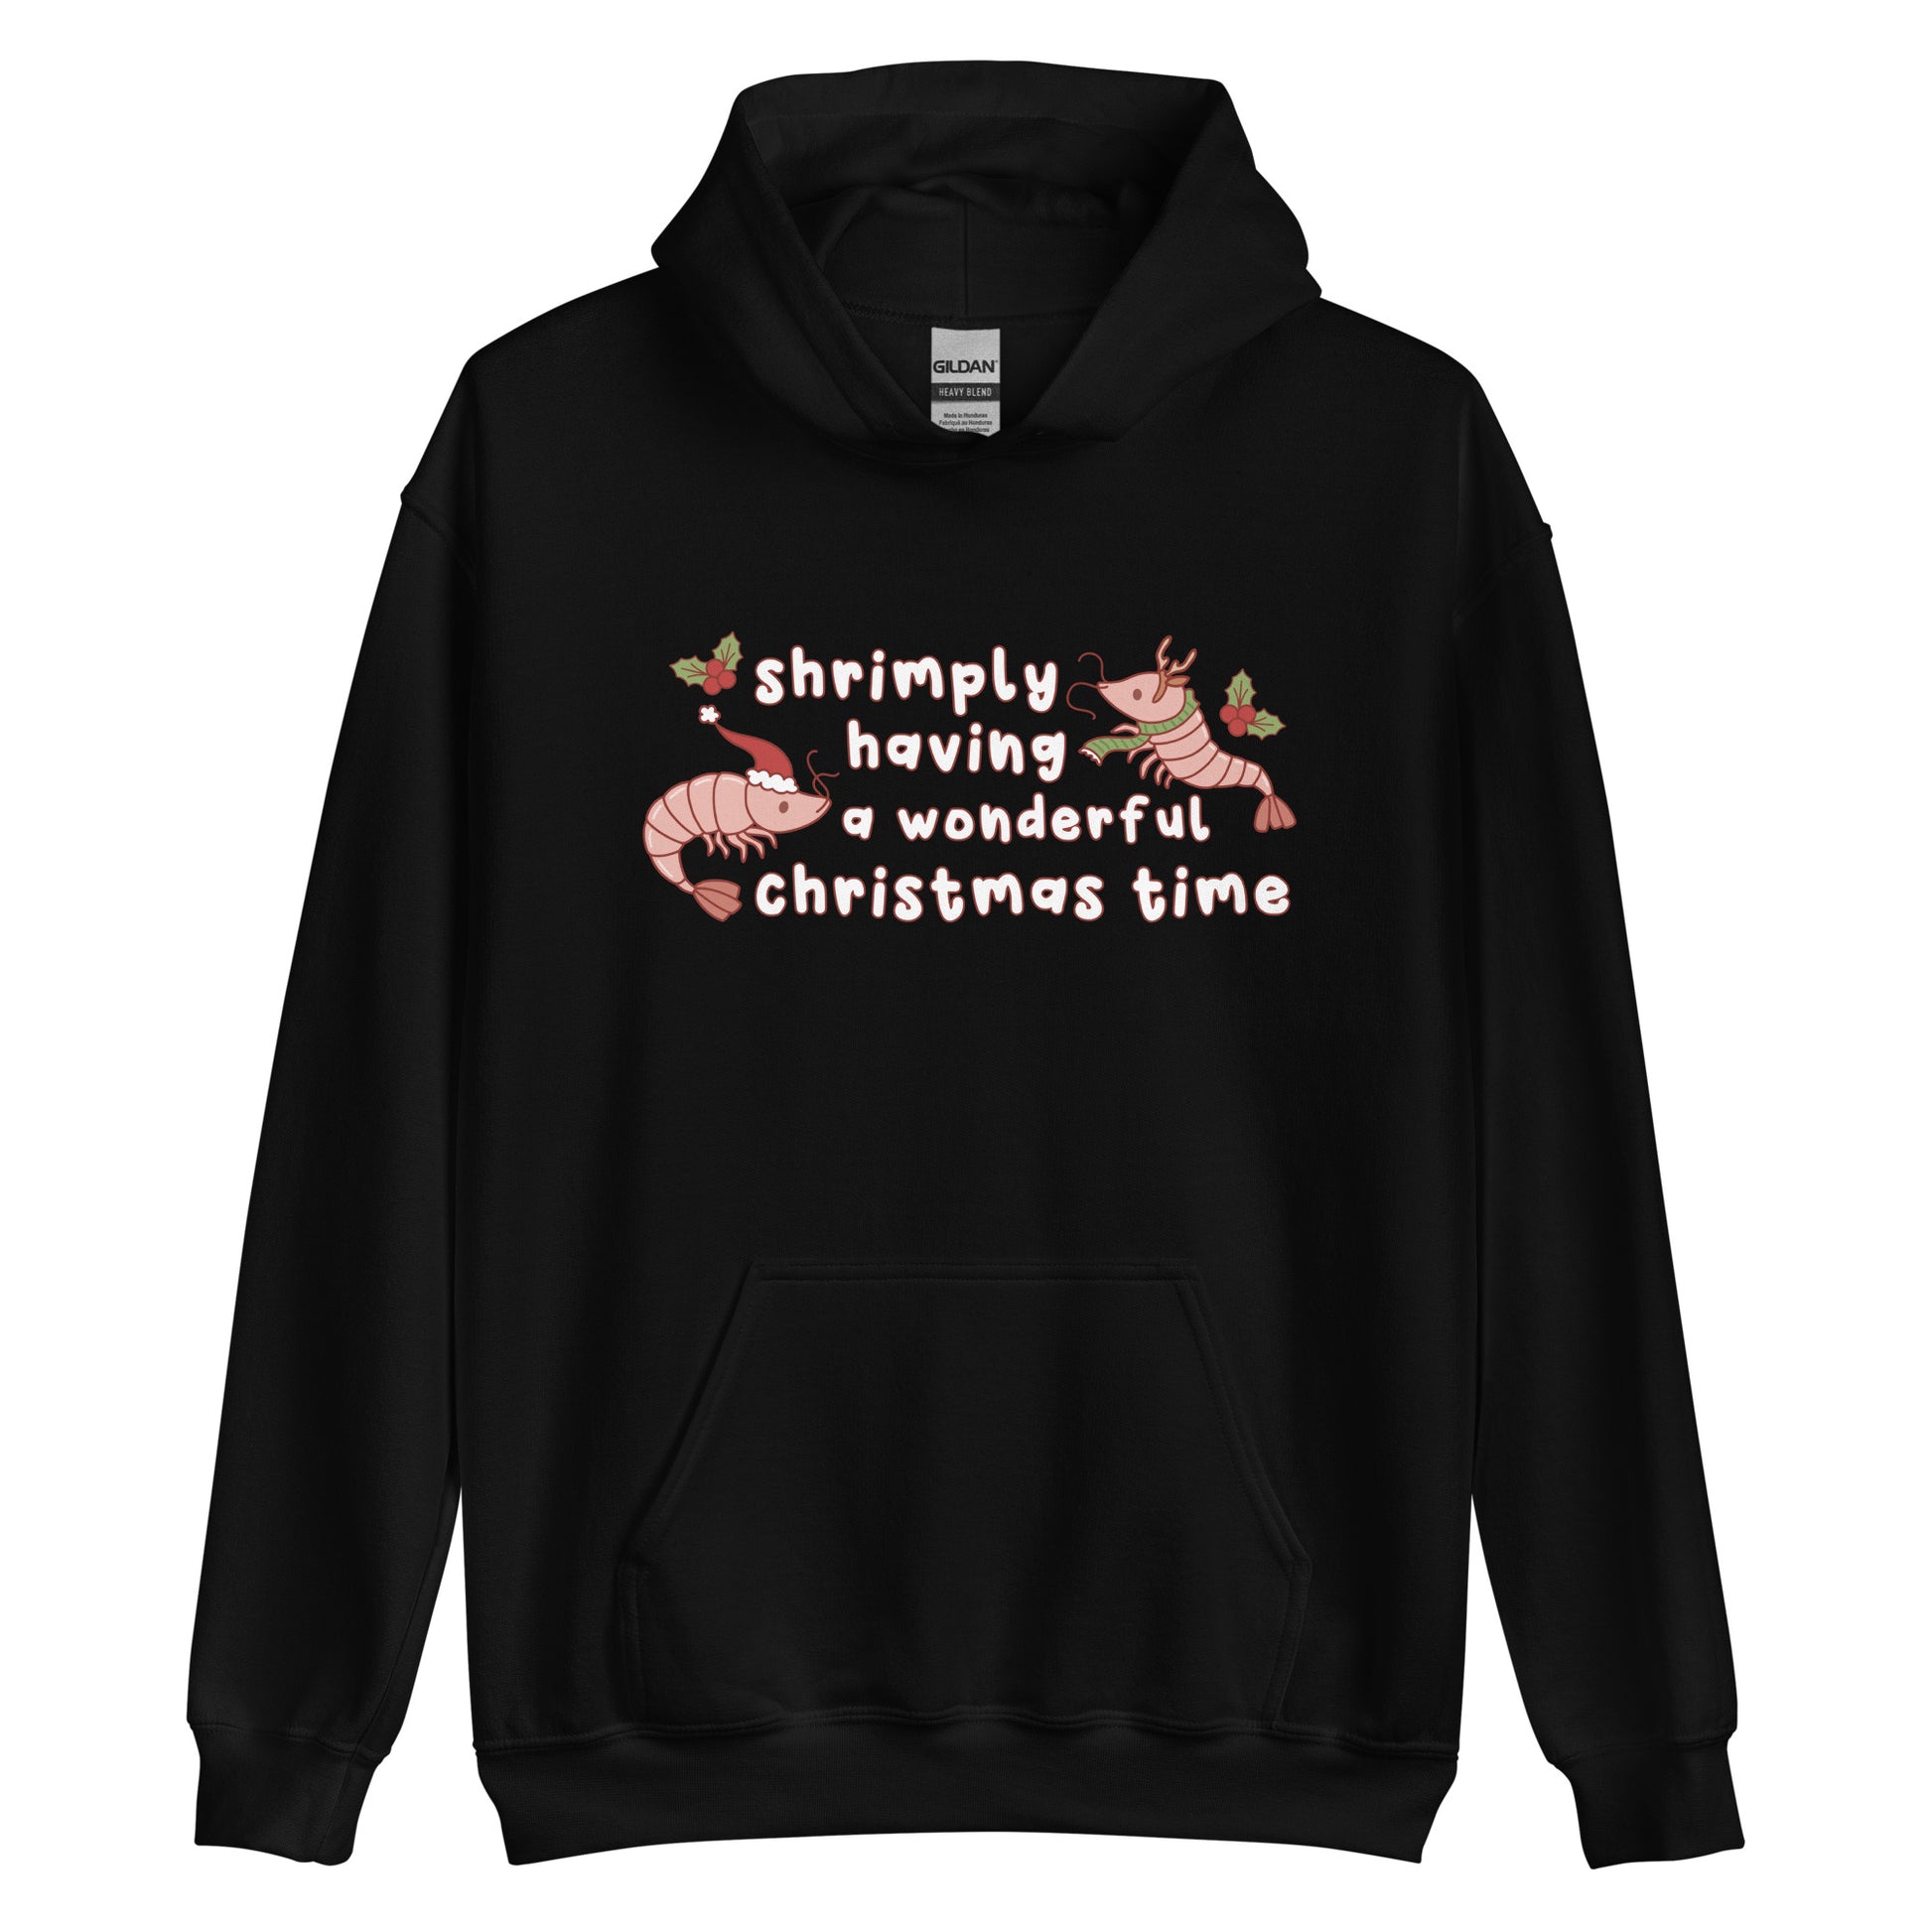 A black hooded sweatshirt featuring an illustration of two festive shrimp - one with a Santa hat, and one with reindeer antlers. Text between the shrimp reads "shrimply having a wonderful Christmas time".